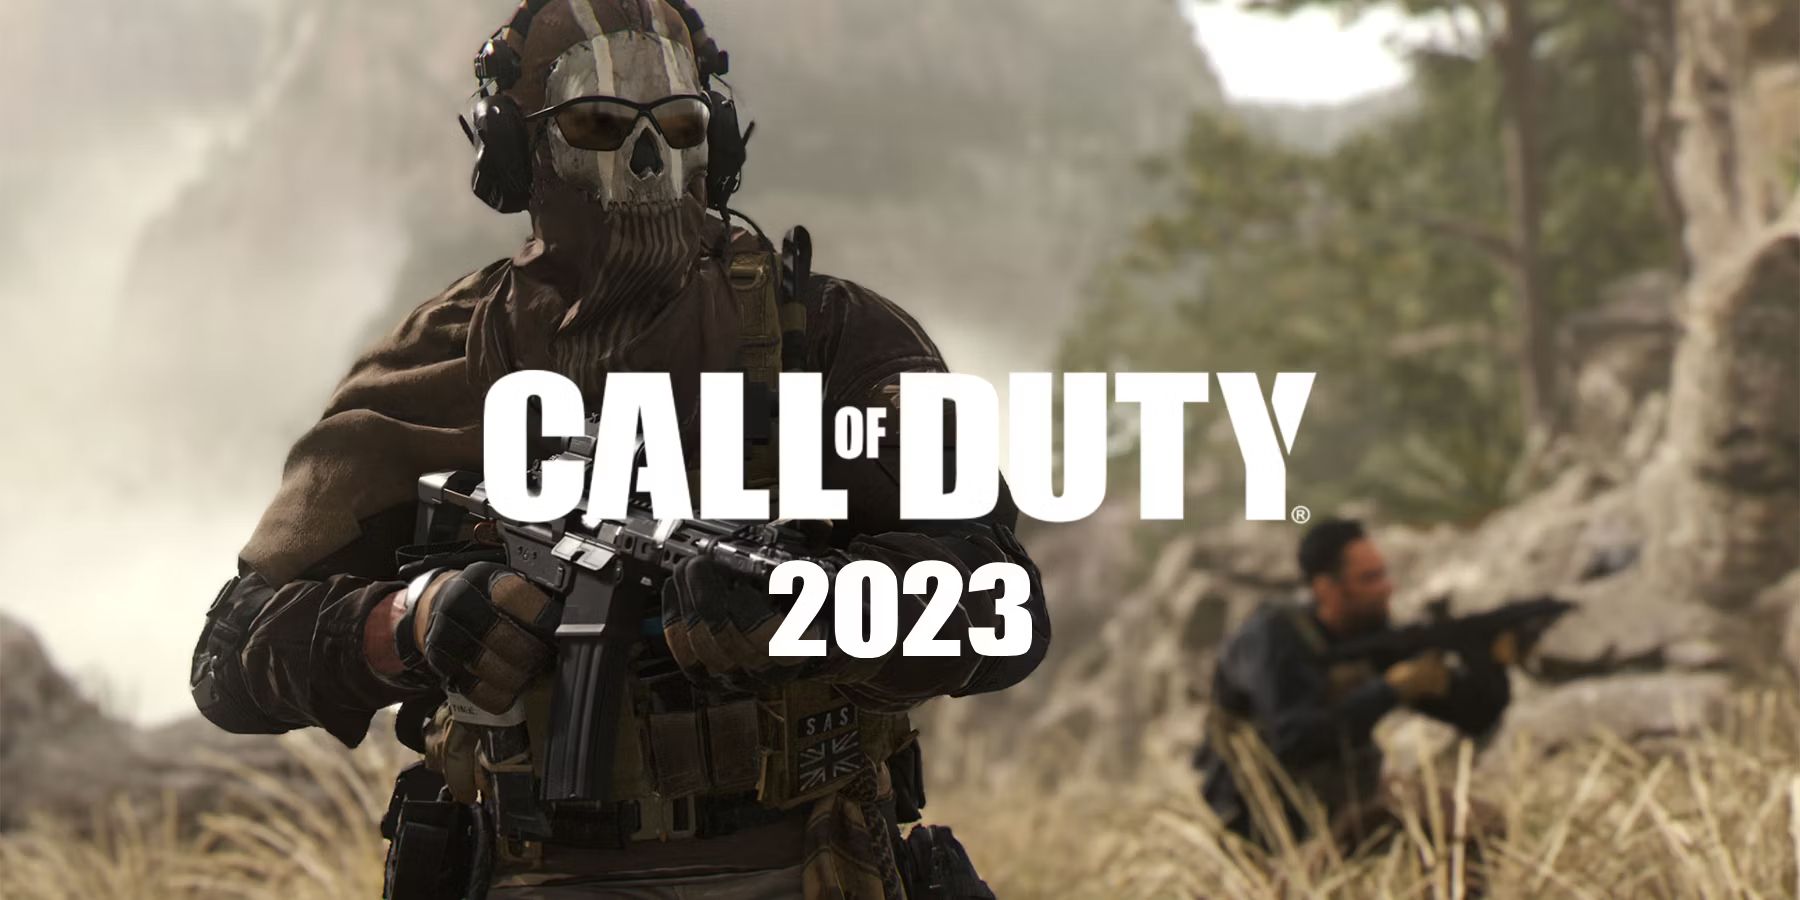 Call of duty 2023 отзывы. Call of Duty 2023. Новая Call of Duty 2023. Салл оф дьюти 2023. Cover line of Duty 2023.